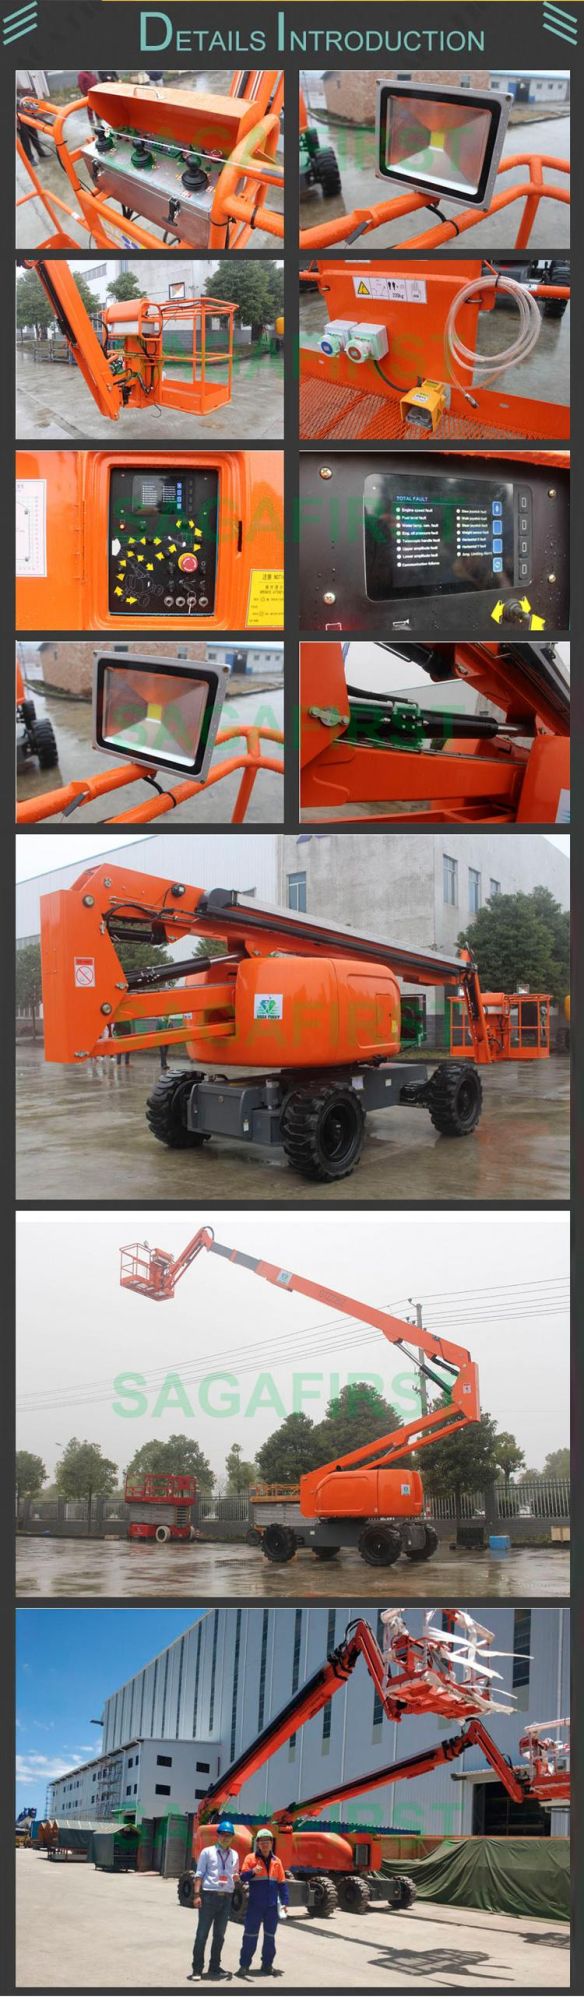 Self Propelled Diesel 12m to 40m Articulated Boom Lift